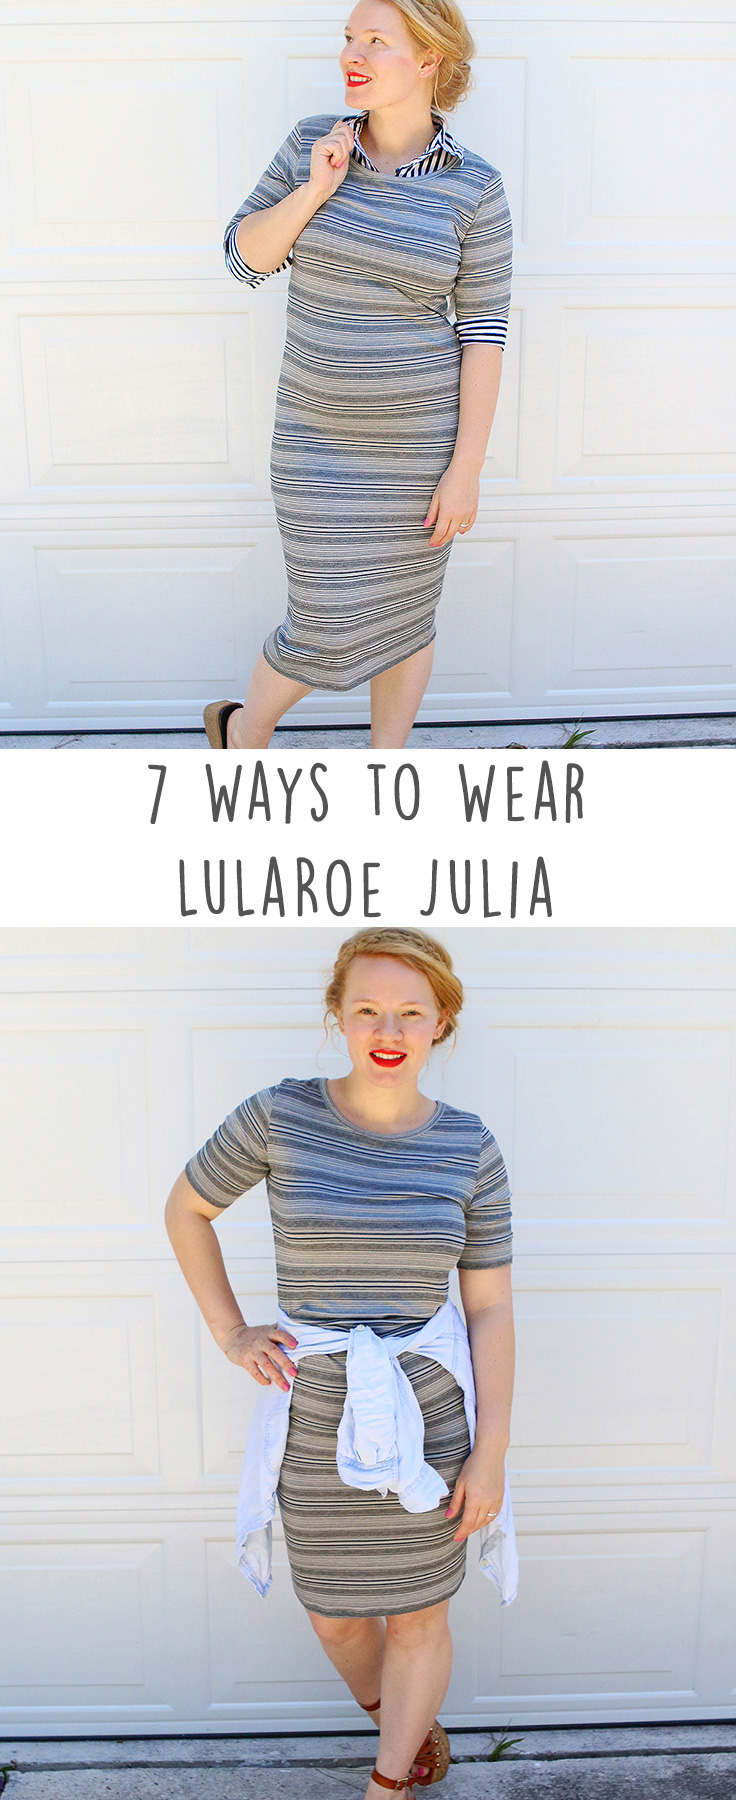 Wearing a larger size LuLaRoe Julia dress (belted or tied from the